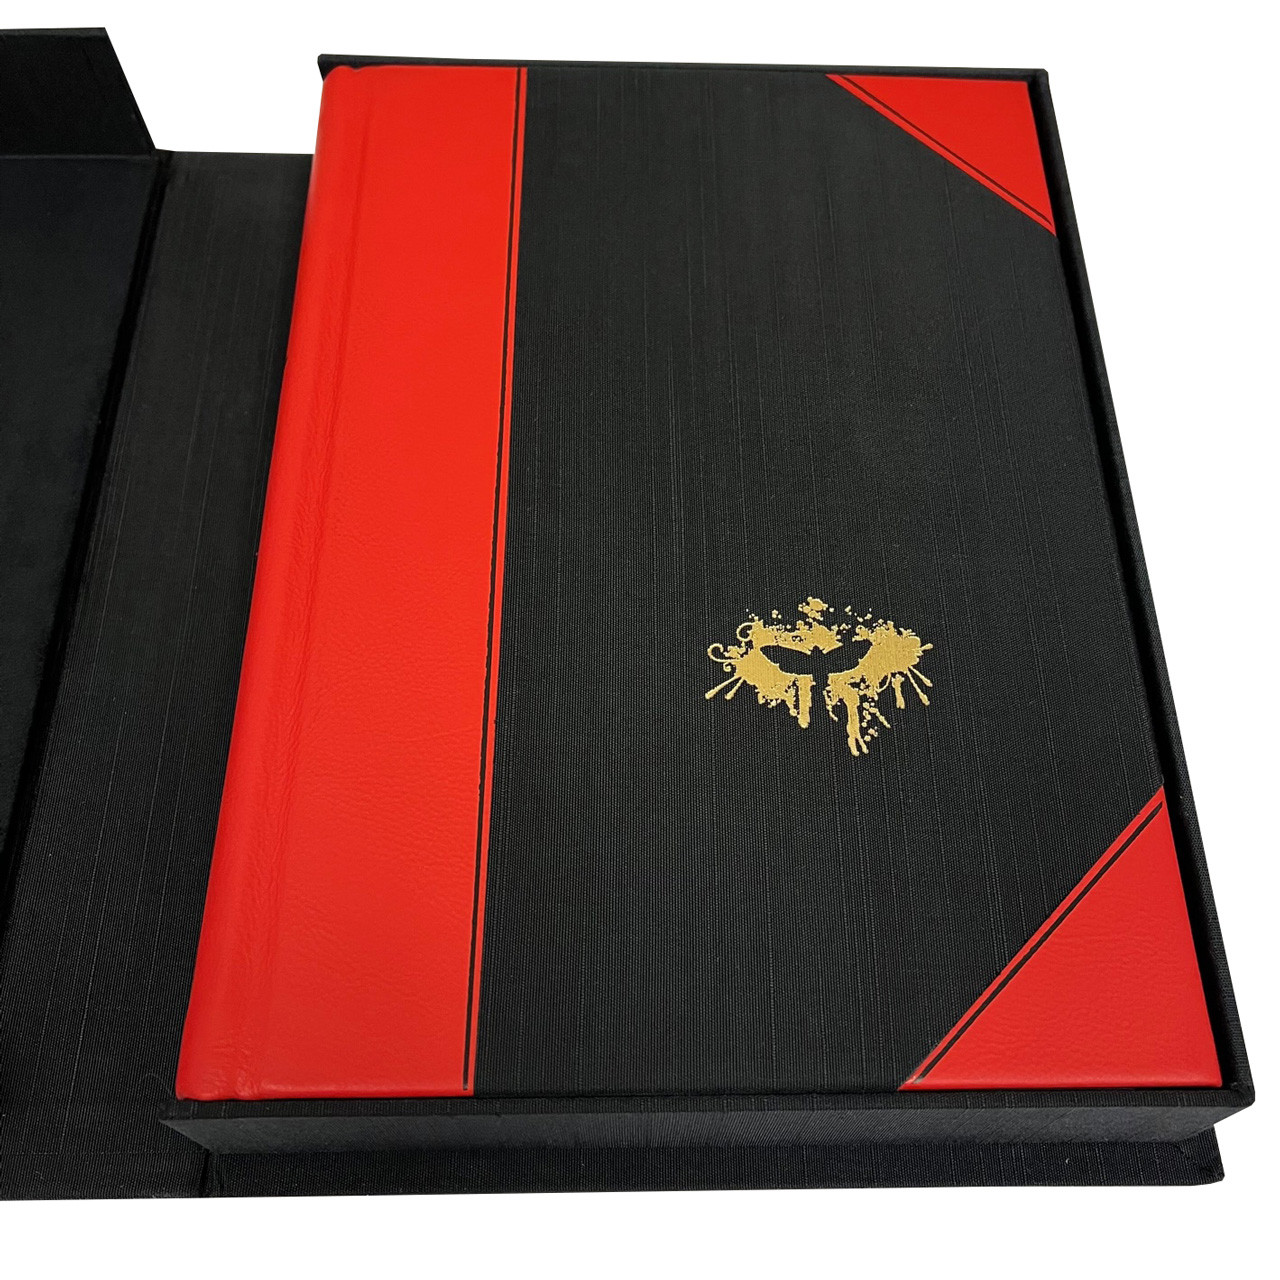 Thomas Harris "The Silence of the Lambs" Traycased Signed Lettered Edition "W" of 52, Leather-Bound [Very Fine]